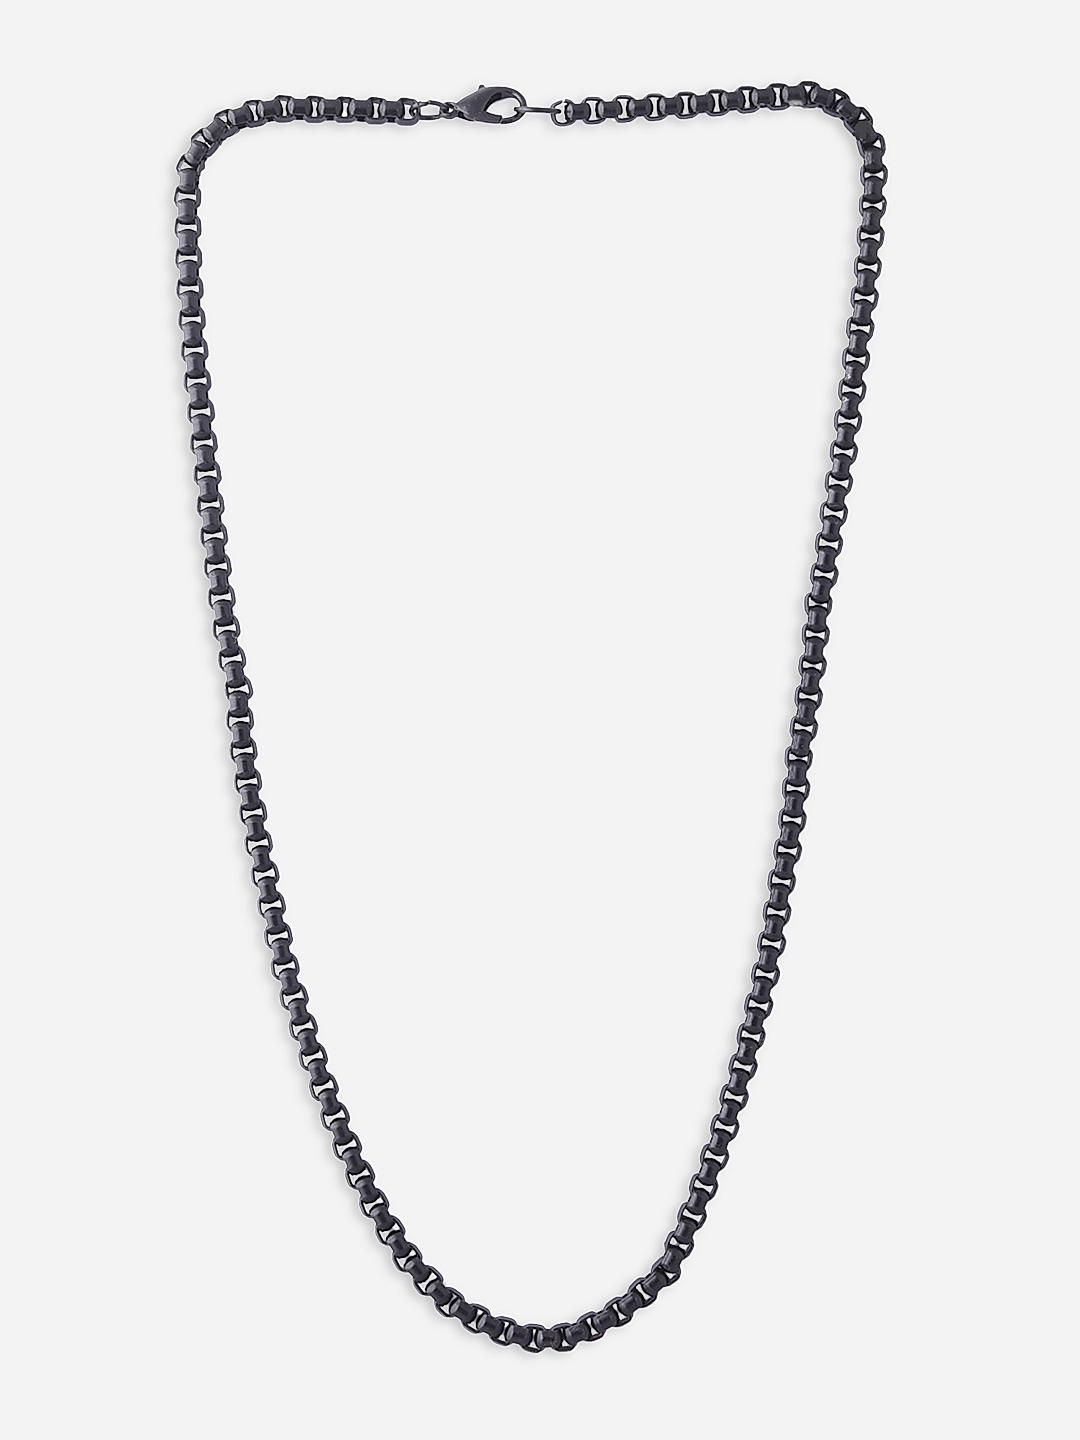 2mm Black venetian round box chain — WE ARE ALL SMITH